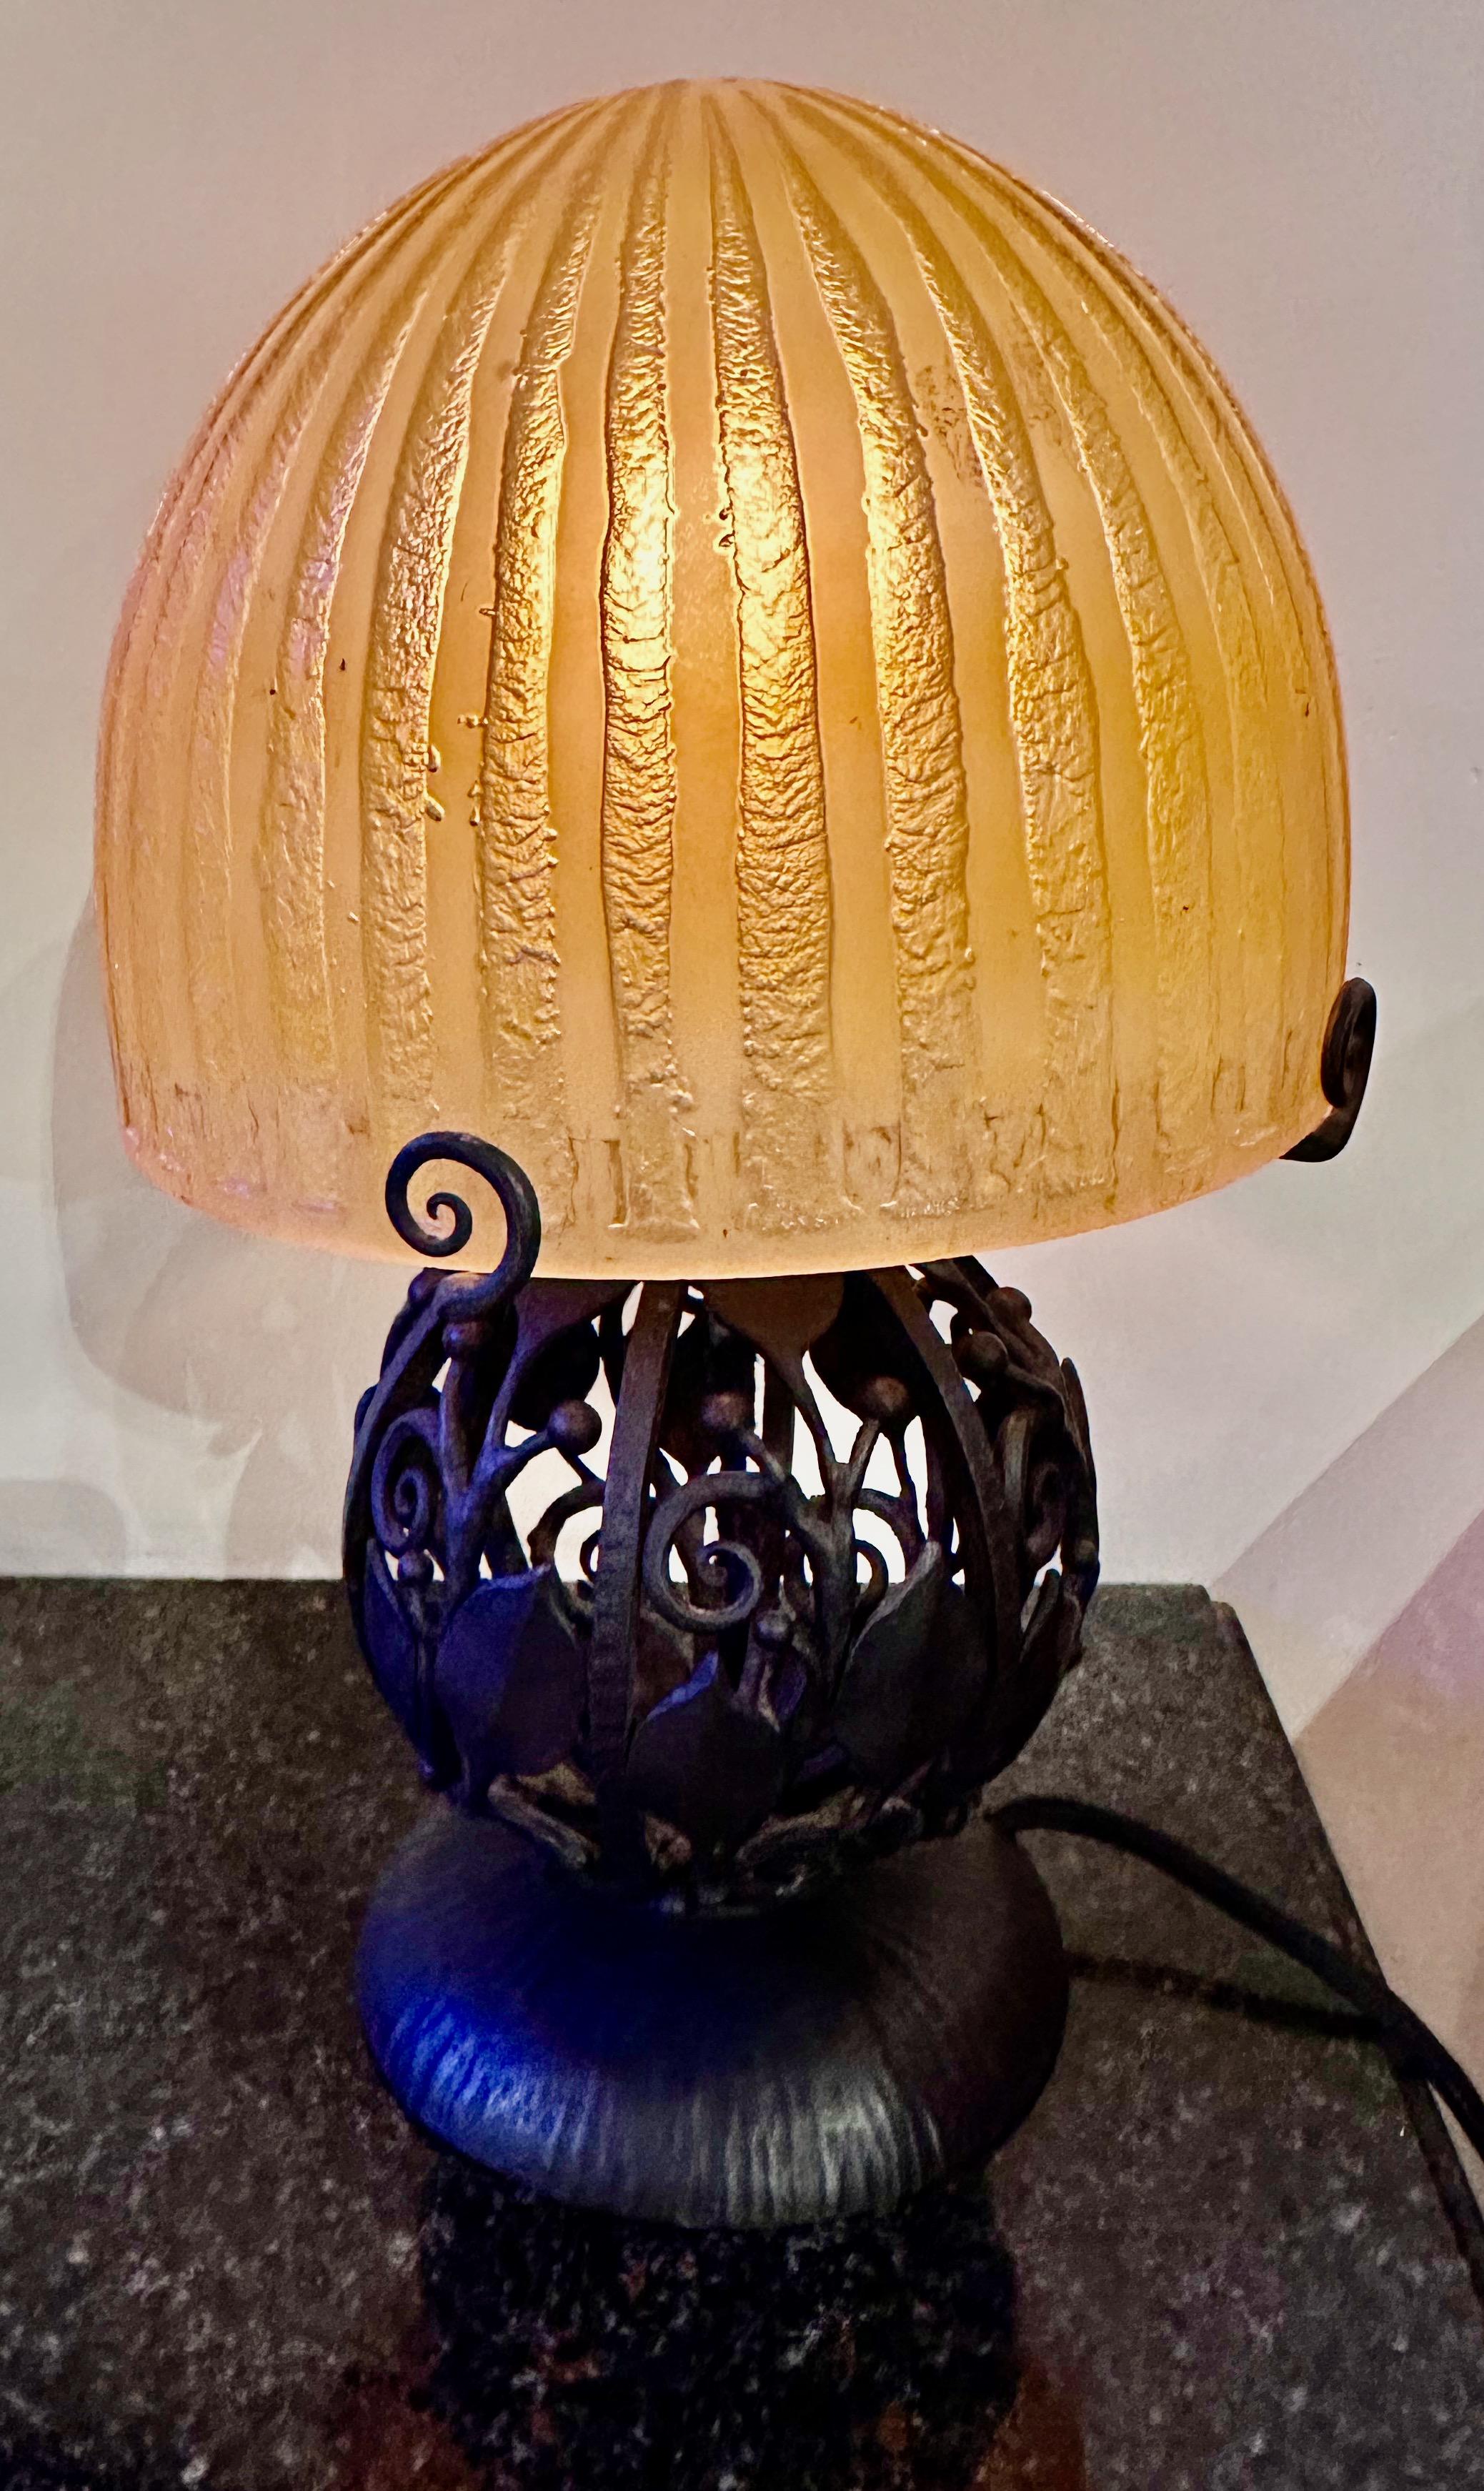 Art Deco acid-etched French Globe Iron Table Lamp by Daum and Katona. This beautiful and unusual lamp is crafted in the “pate de verre” technique of thick glass heavily etched and carved in geometric, stylized pattern accented with hand-made